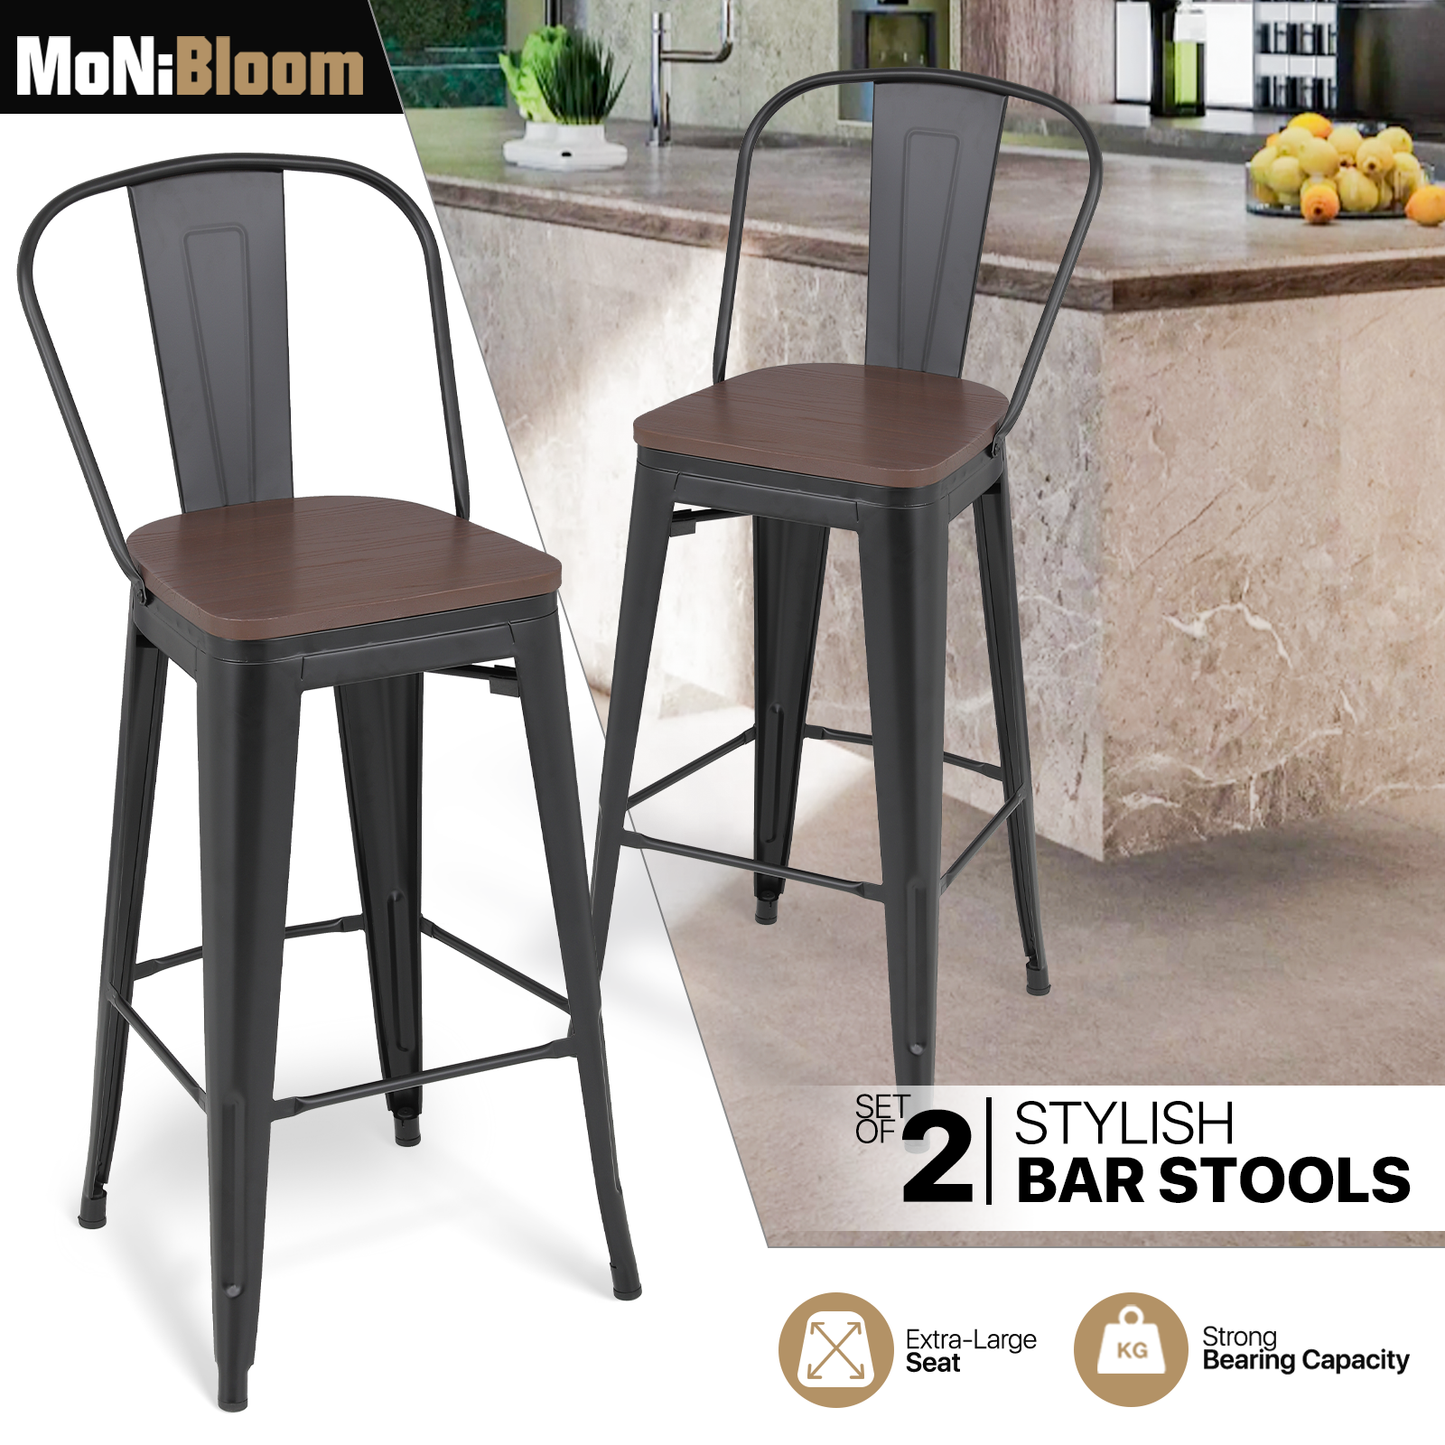 2 Pieces Bar Chairs - Metal Frame w/Wooden Seat - 30.5'' Seat to Floor